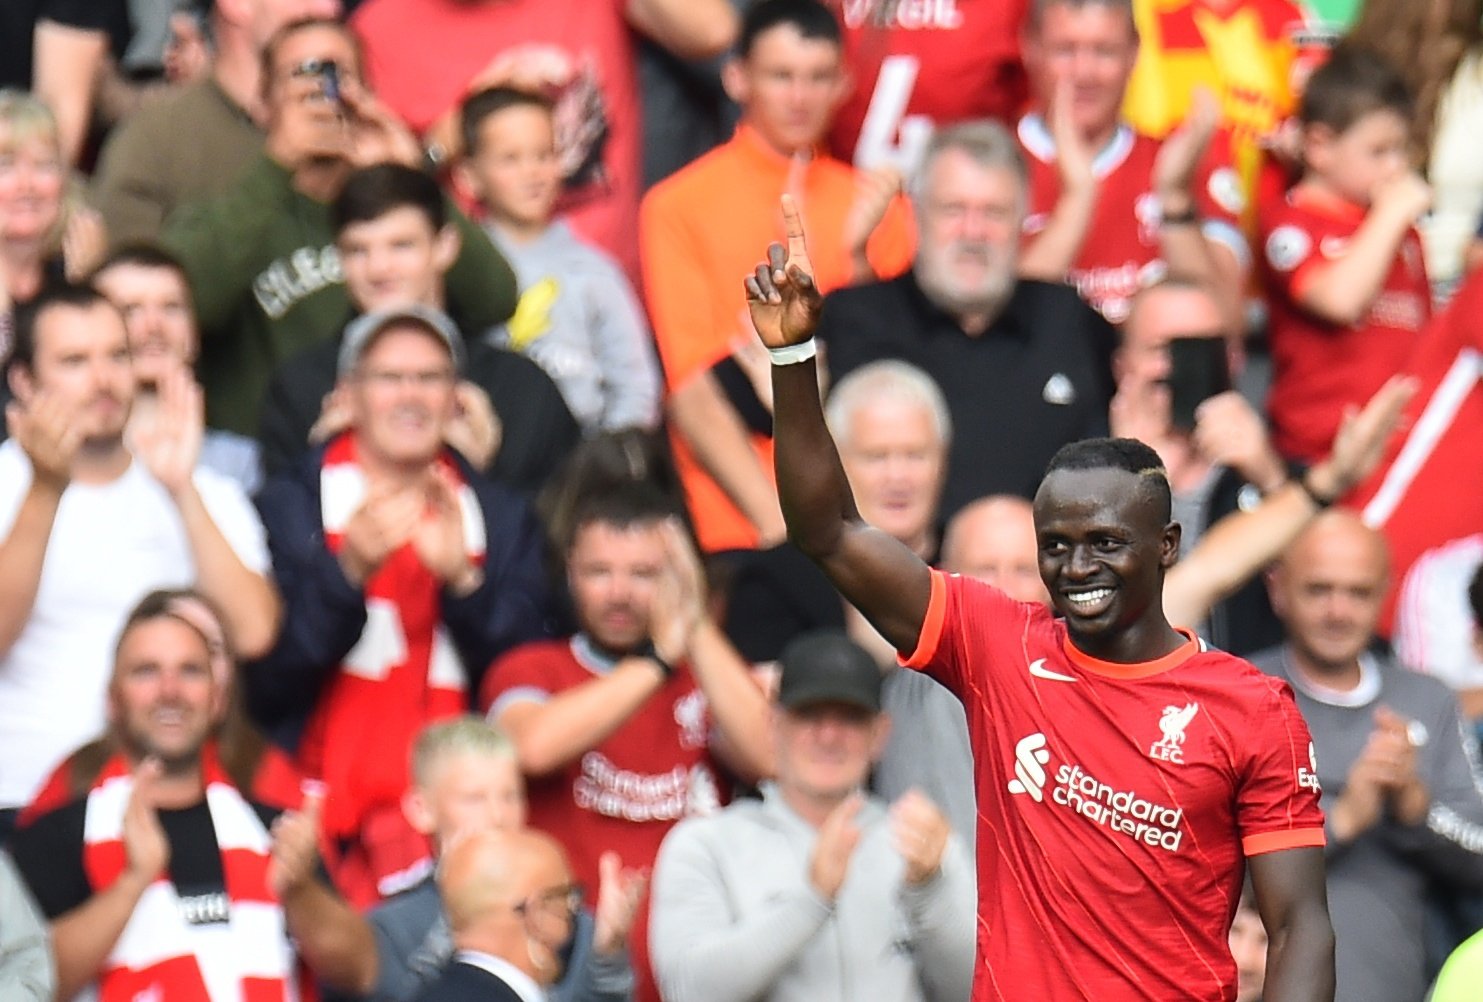 Sadio Mane celebrates scoring his 100th goal in a Liverpool shirt during the Premier League match against Crystal Palace at Anfield, Liverpool, England, Sept. 18, 2021. (Reuters Photo)